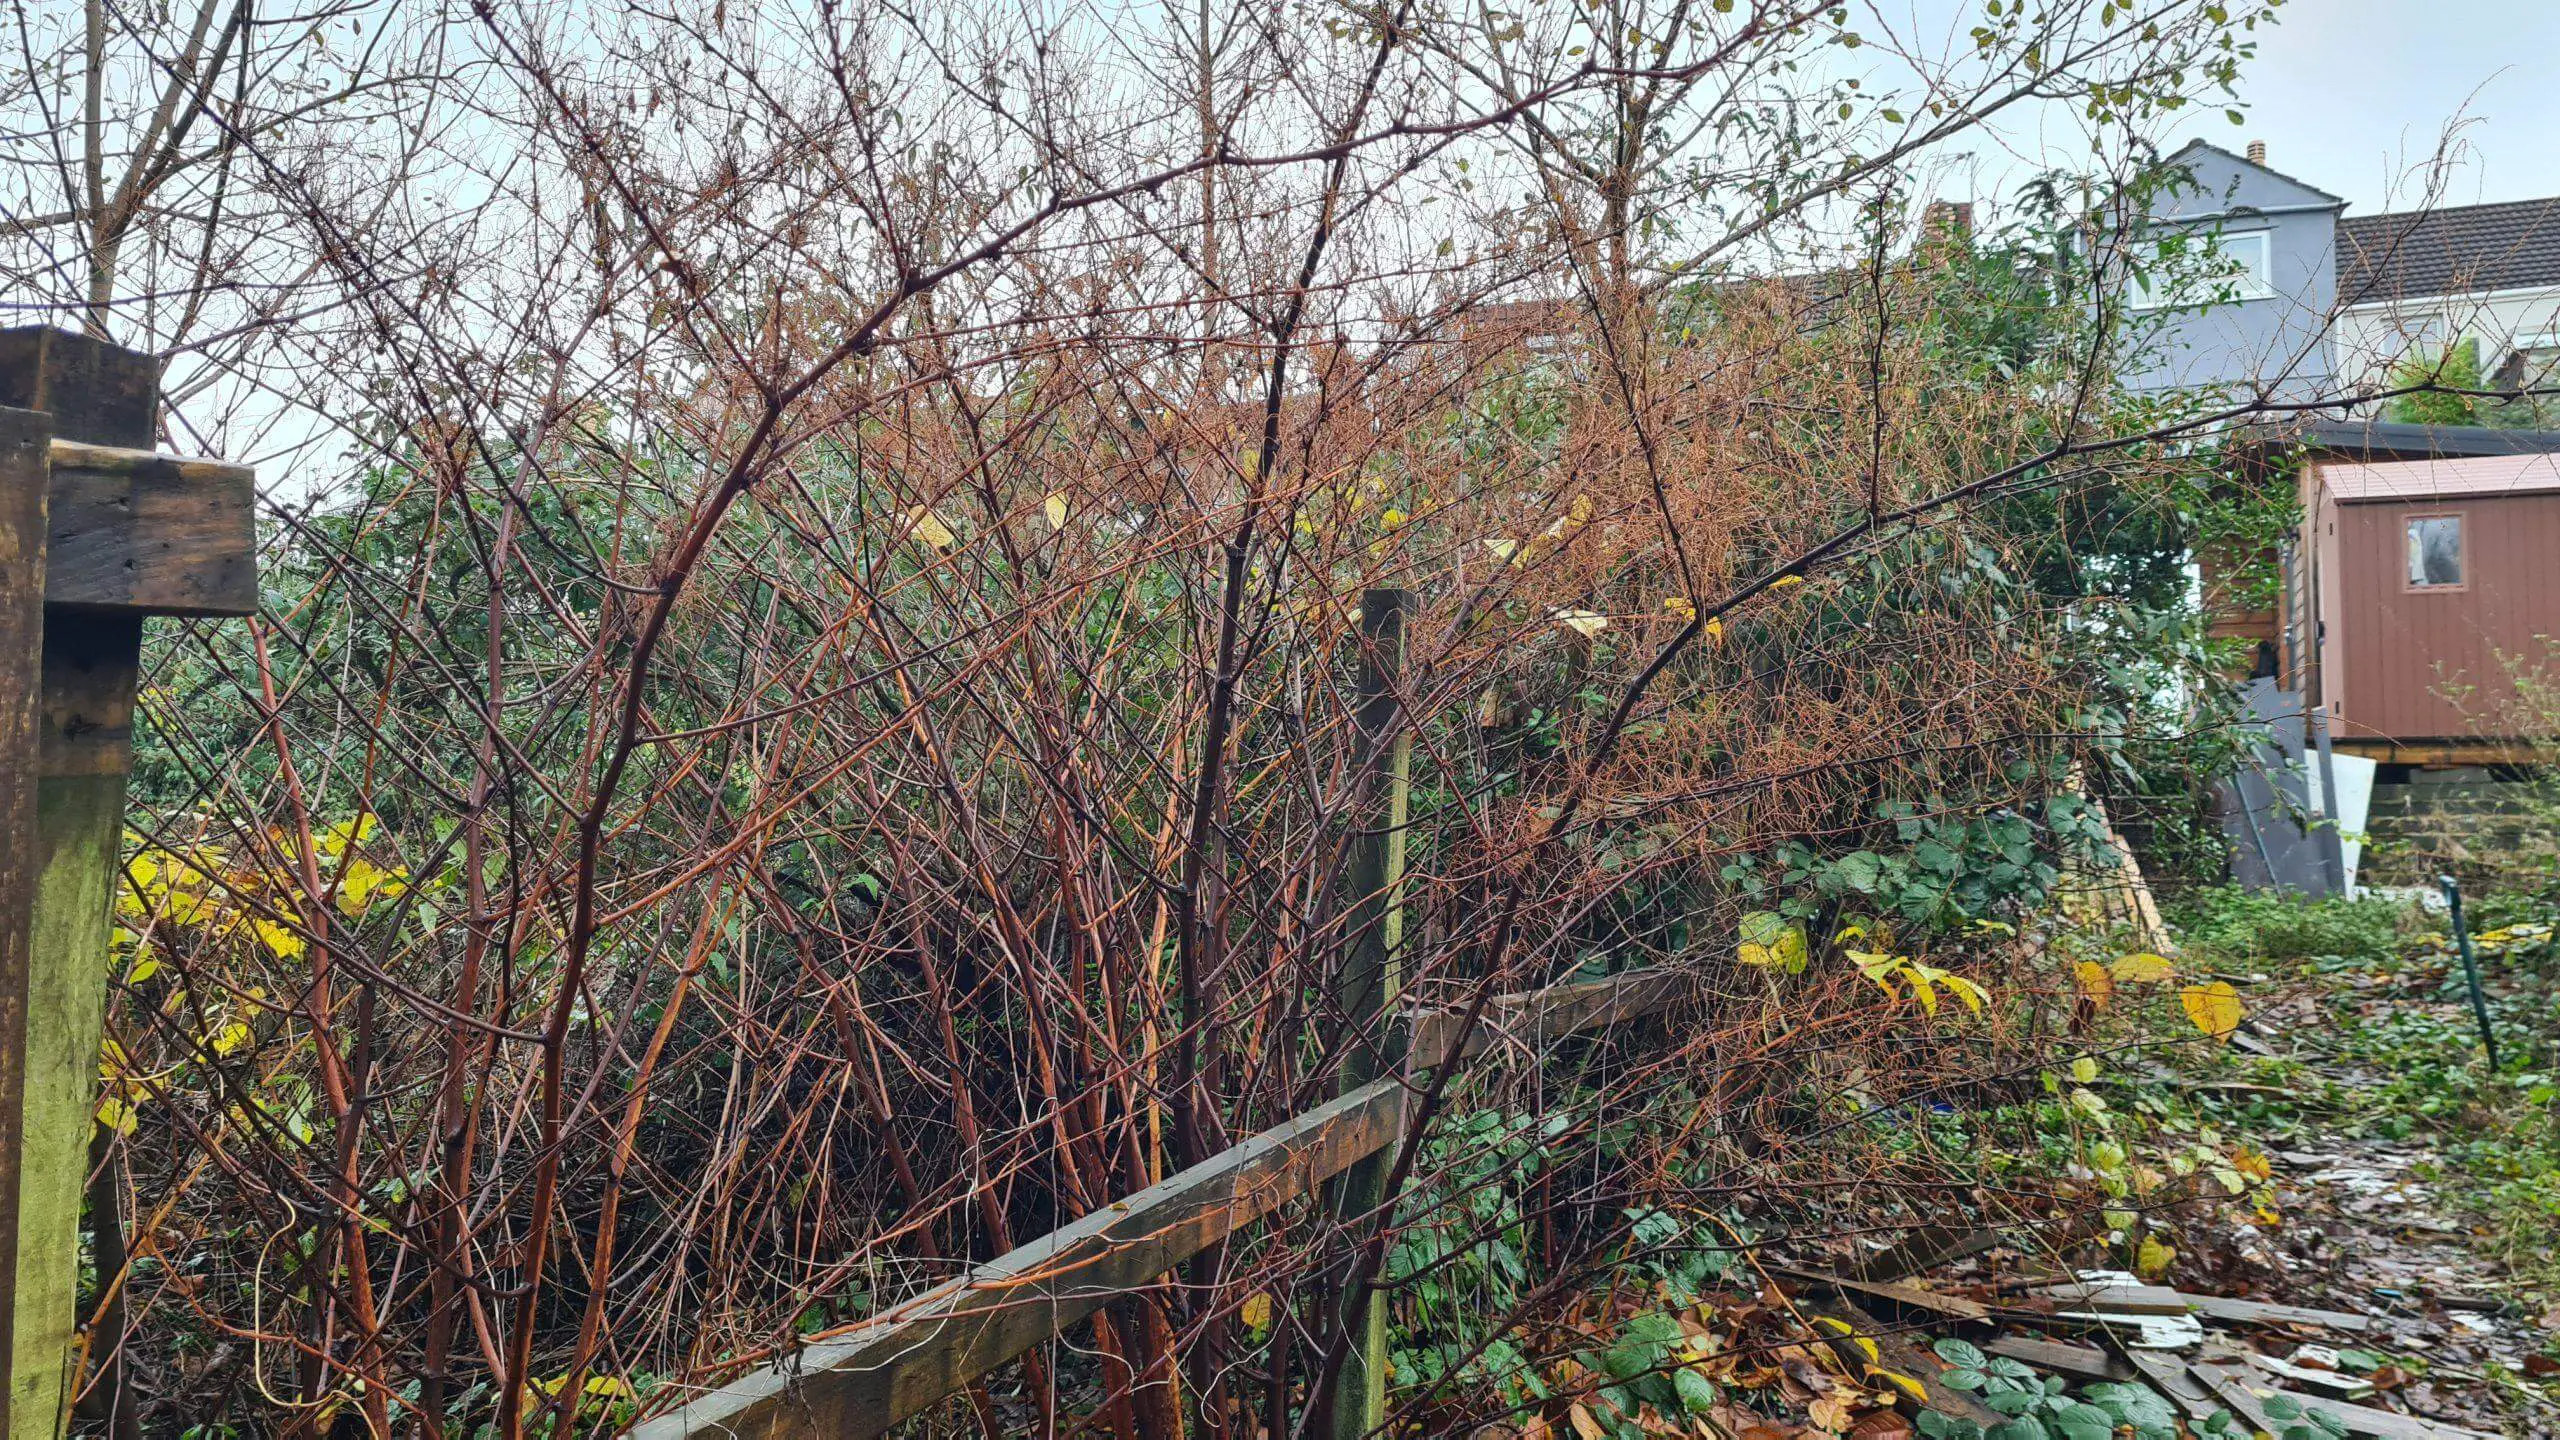 Damage caused to the property from the expansion of knotweed from one property to another